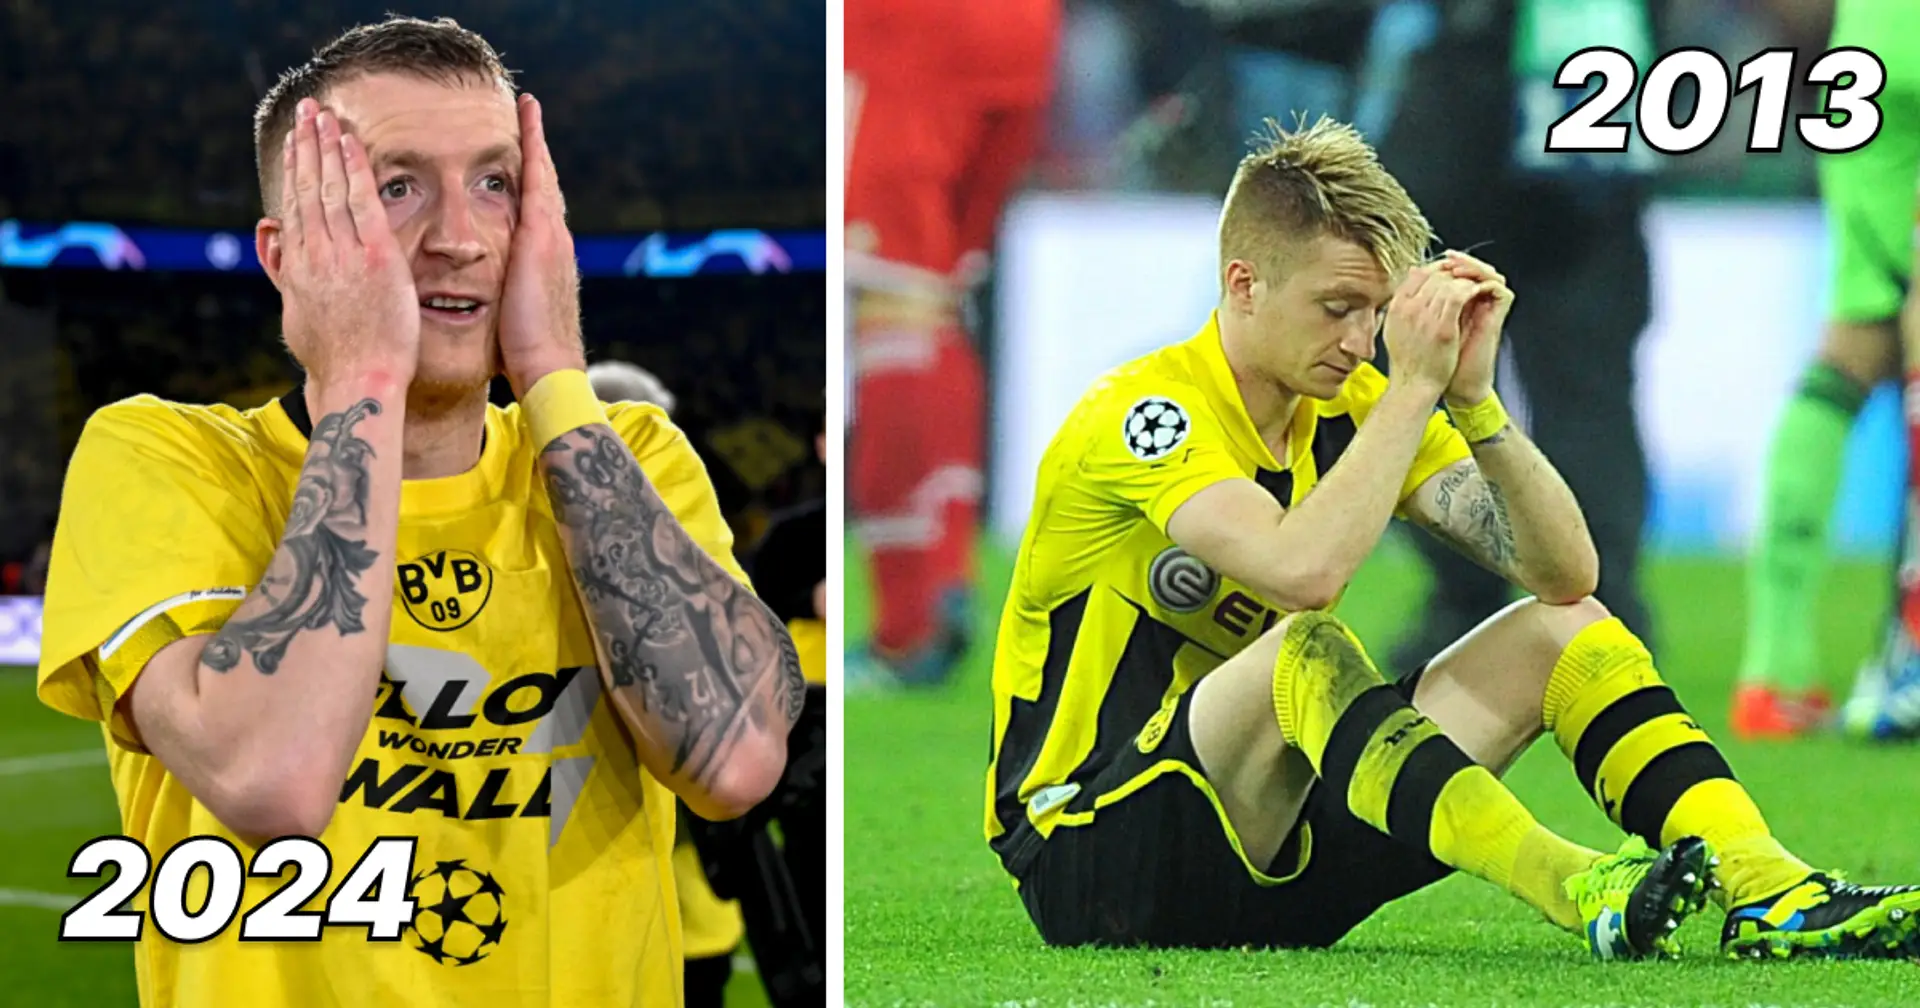 'We have to make it happen, it's now': Marco Reus nearly in tears as Dortmund make CL final